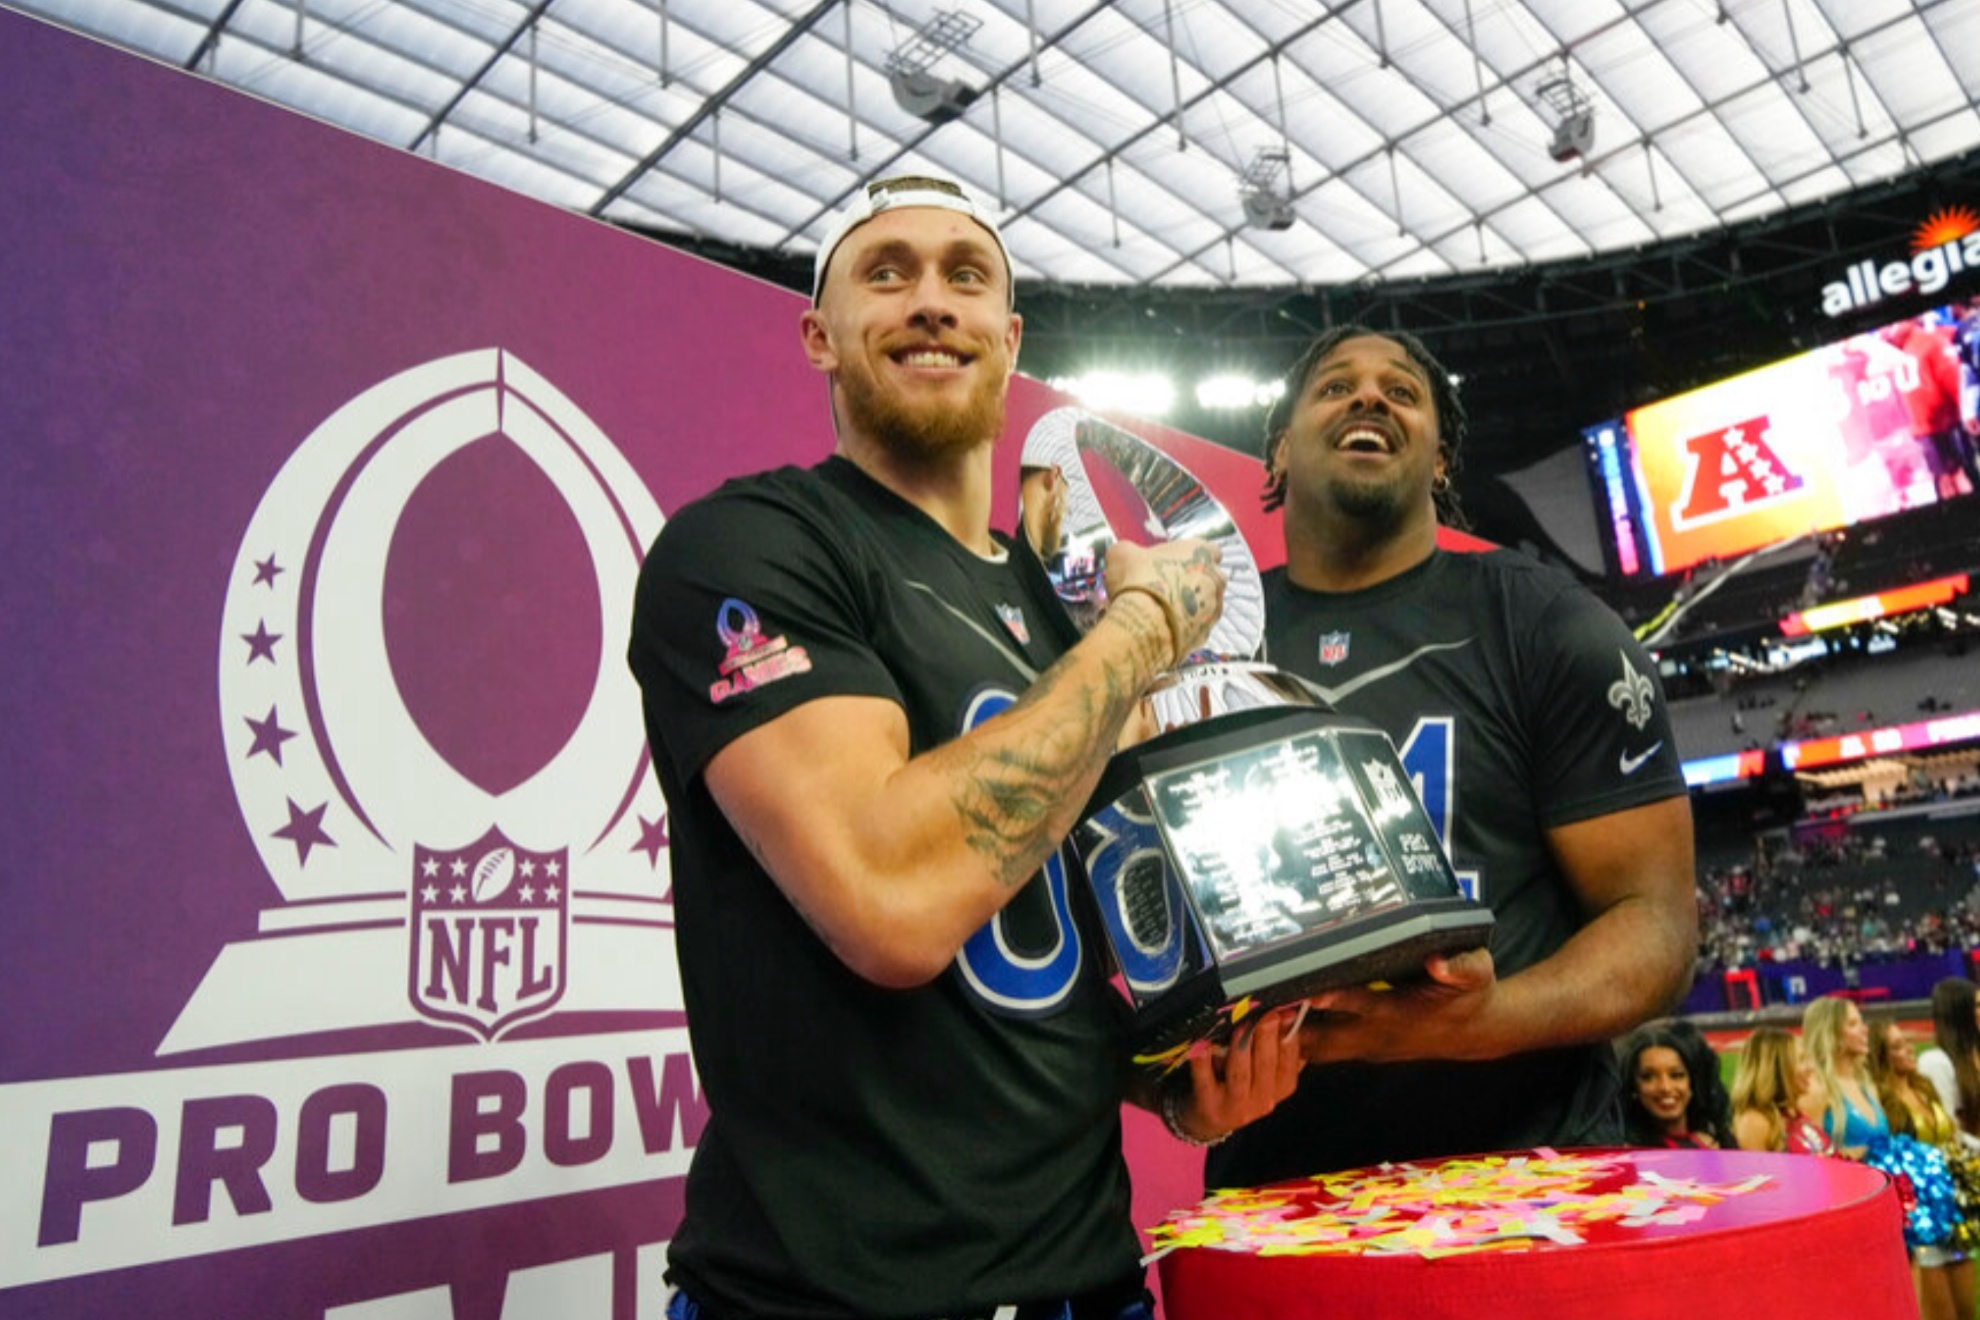 The NFL Pro Bowl will take place this Sunday in Orlando, Florida